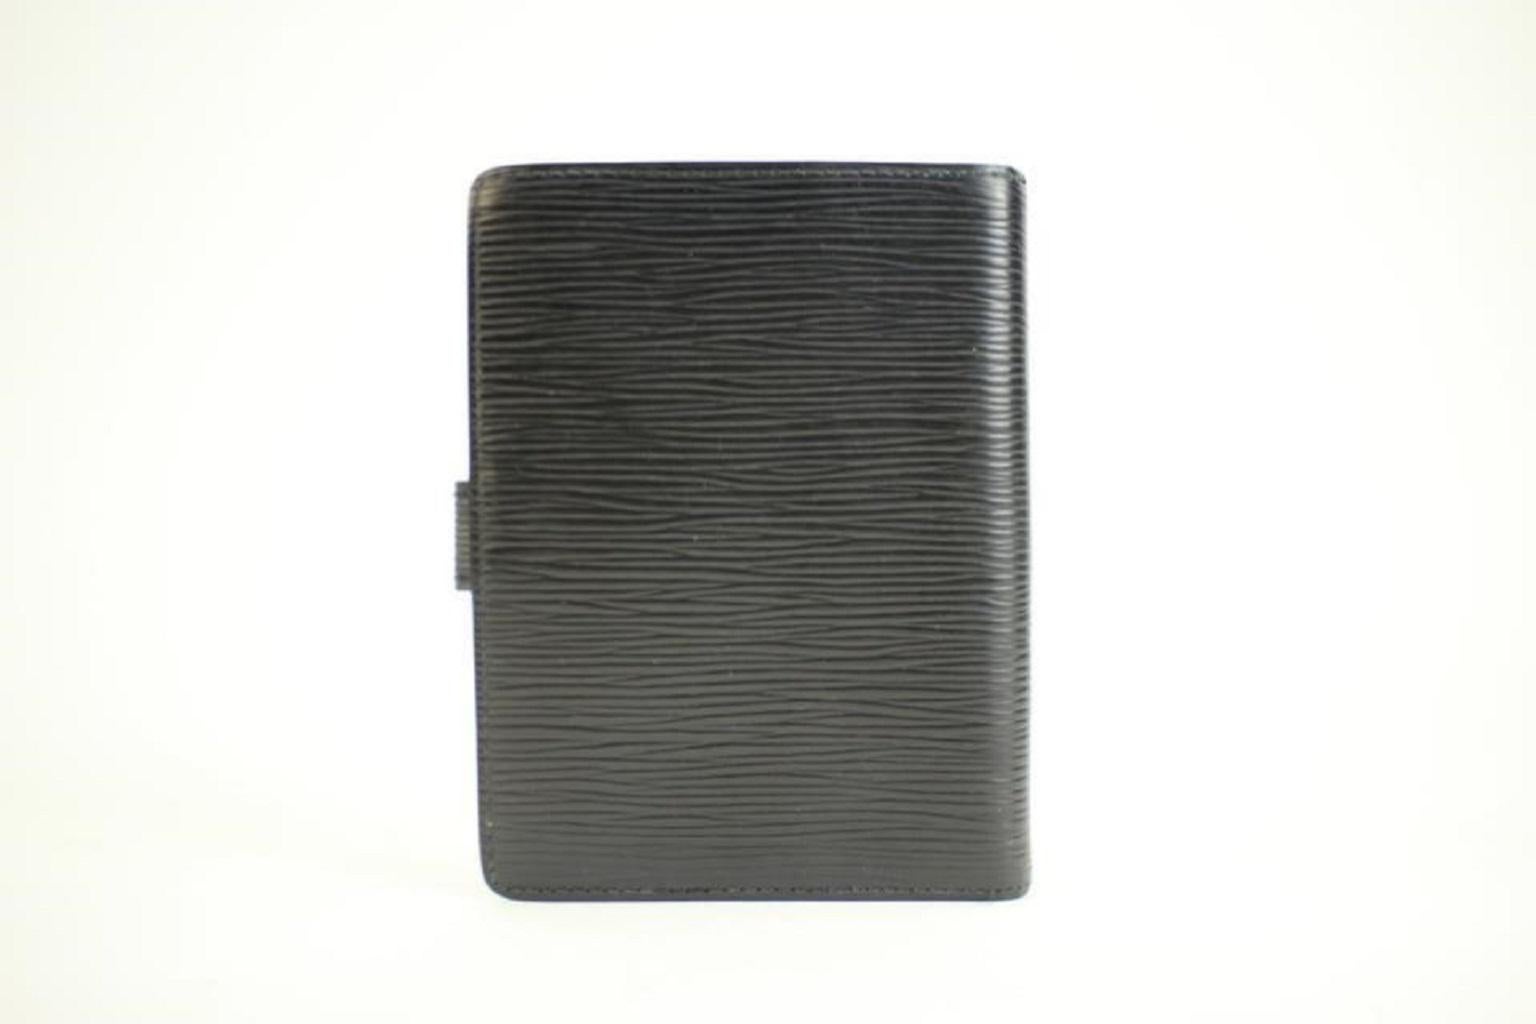 Louis Vuitton Black Epi Leather Small Ring Agenda PM Notebook Cover 86038 For Sale 3